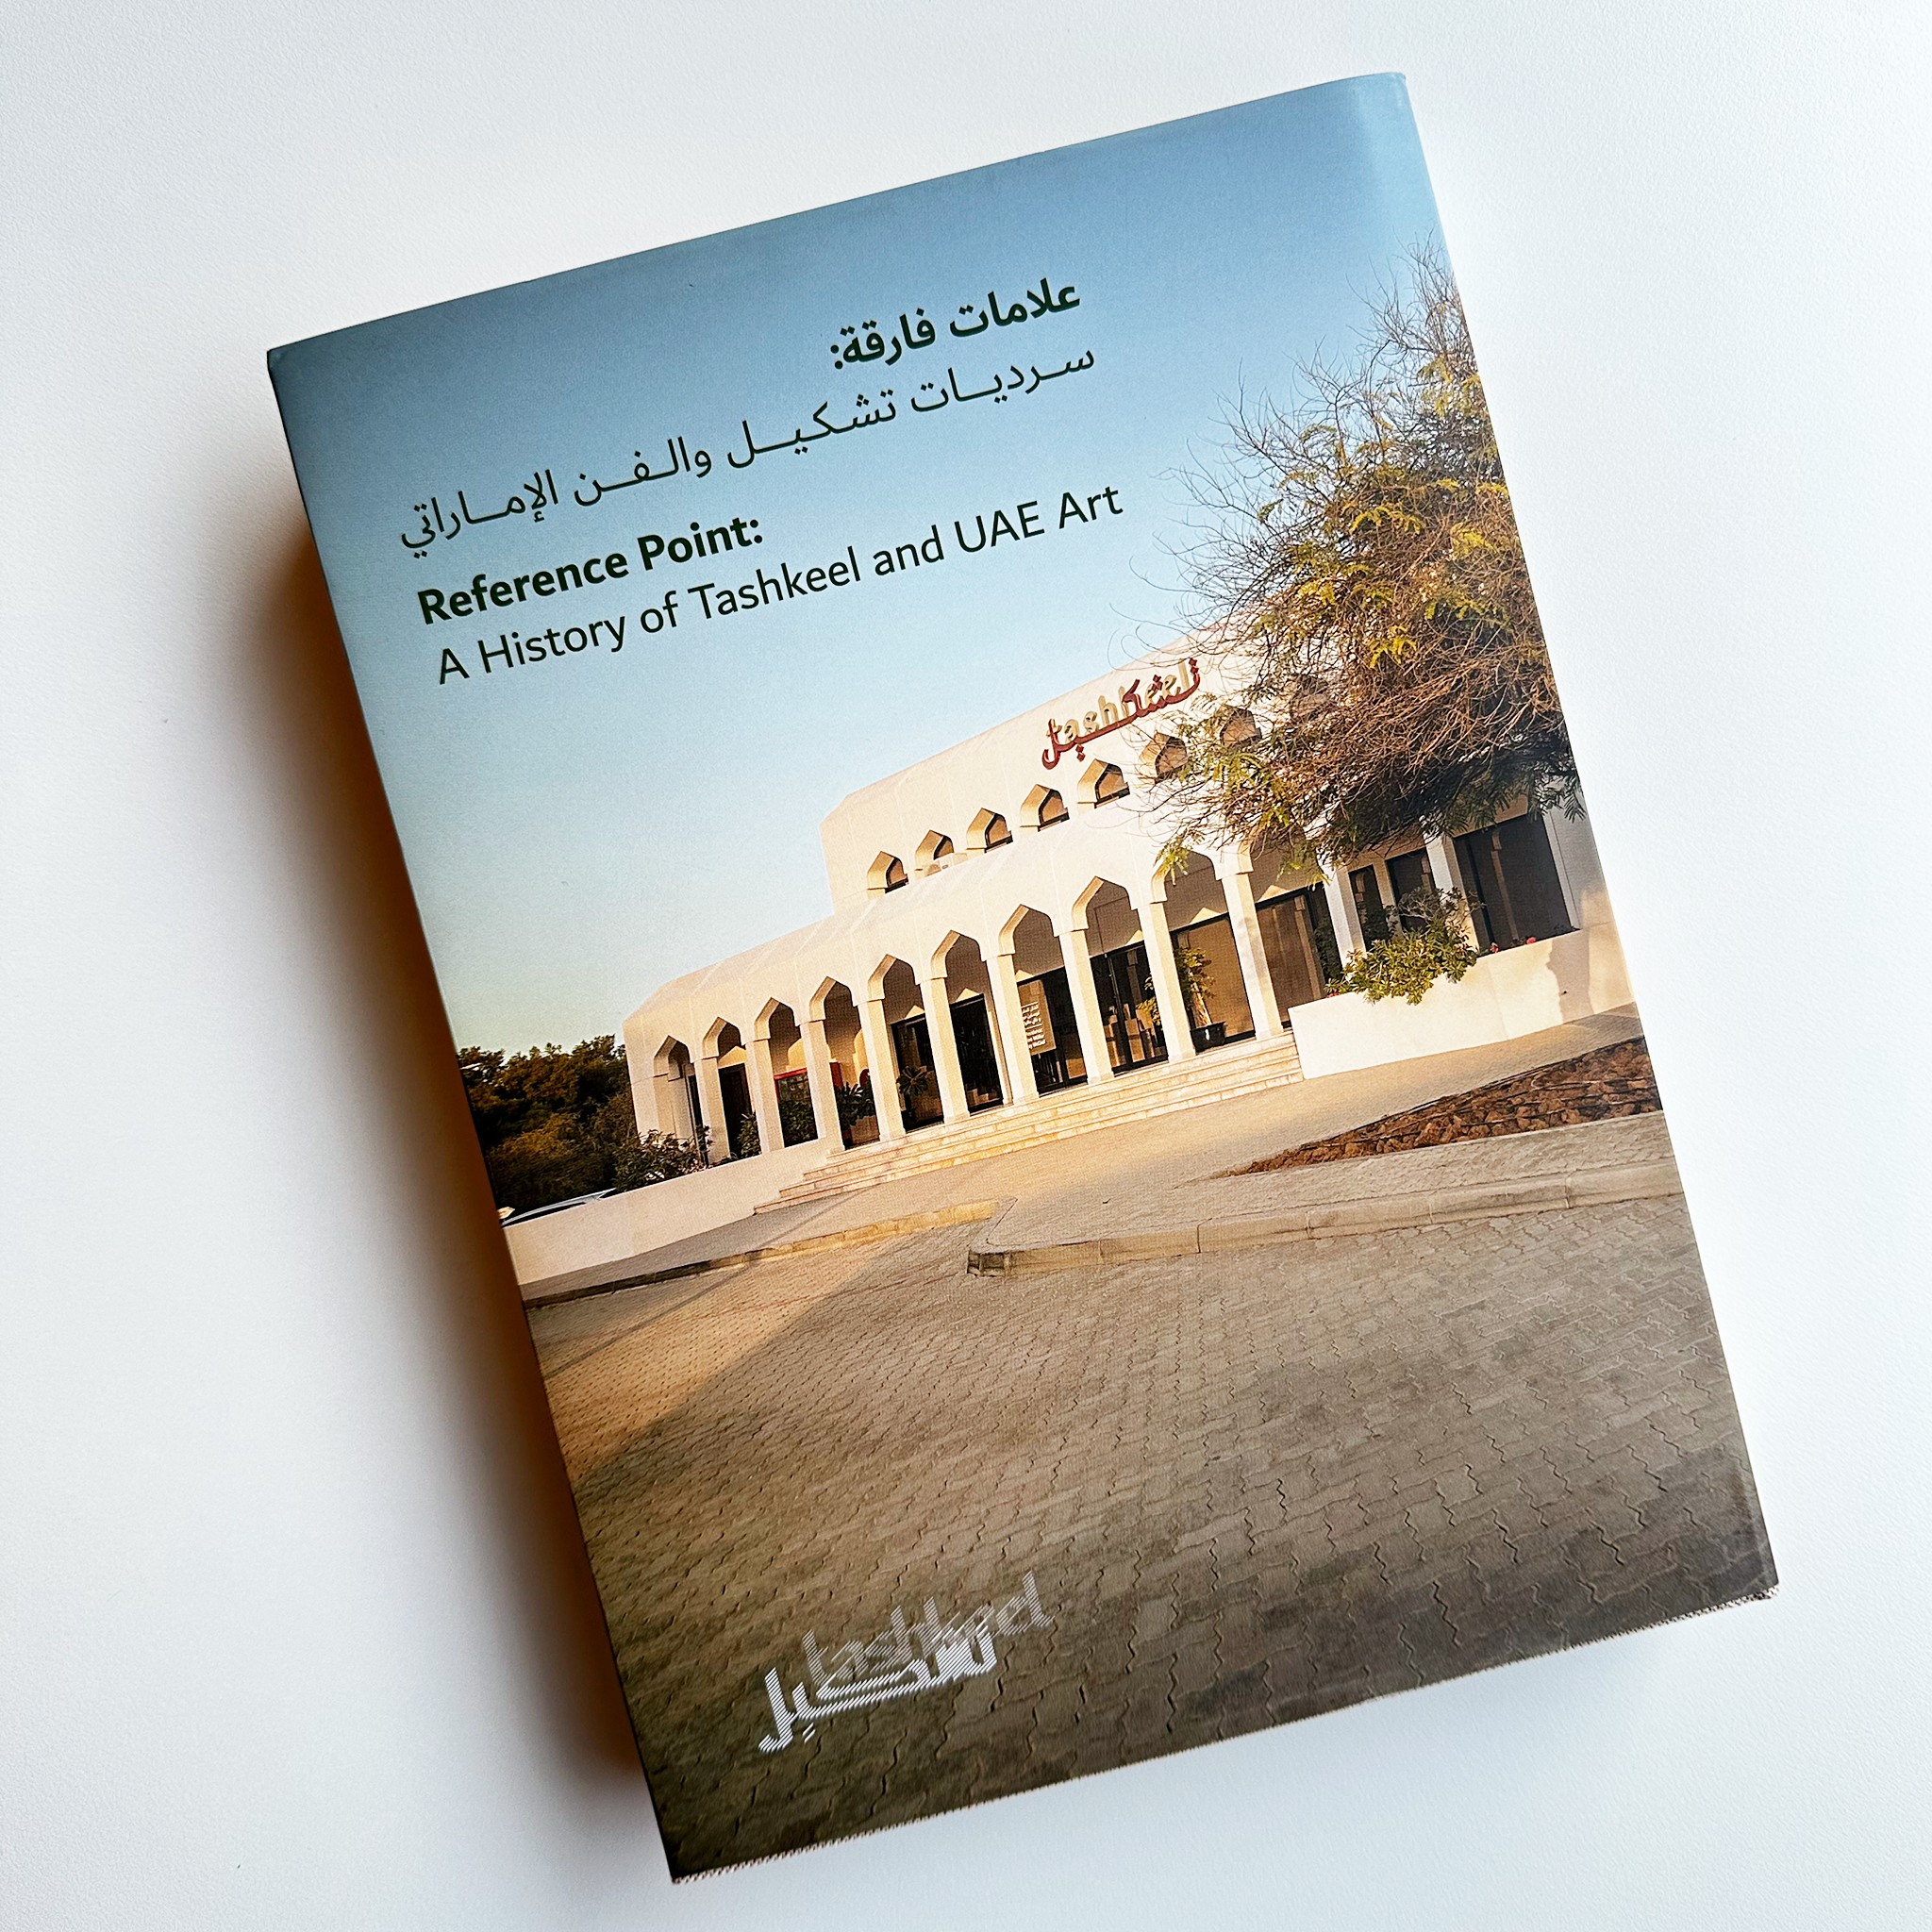 Reference Point: A History of Tashkeel and UAE Art